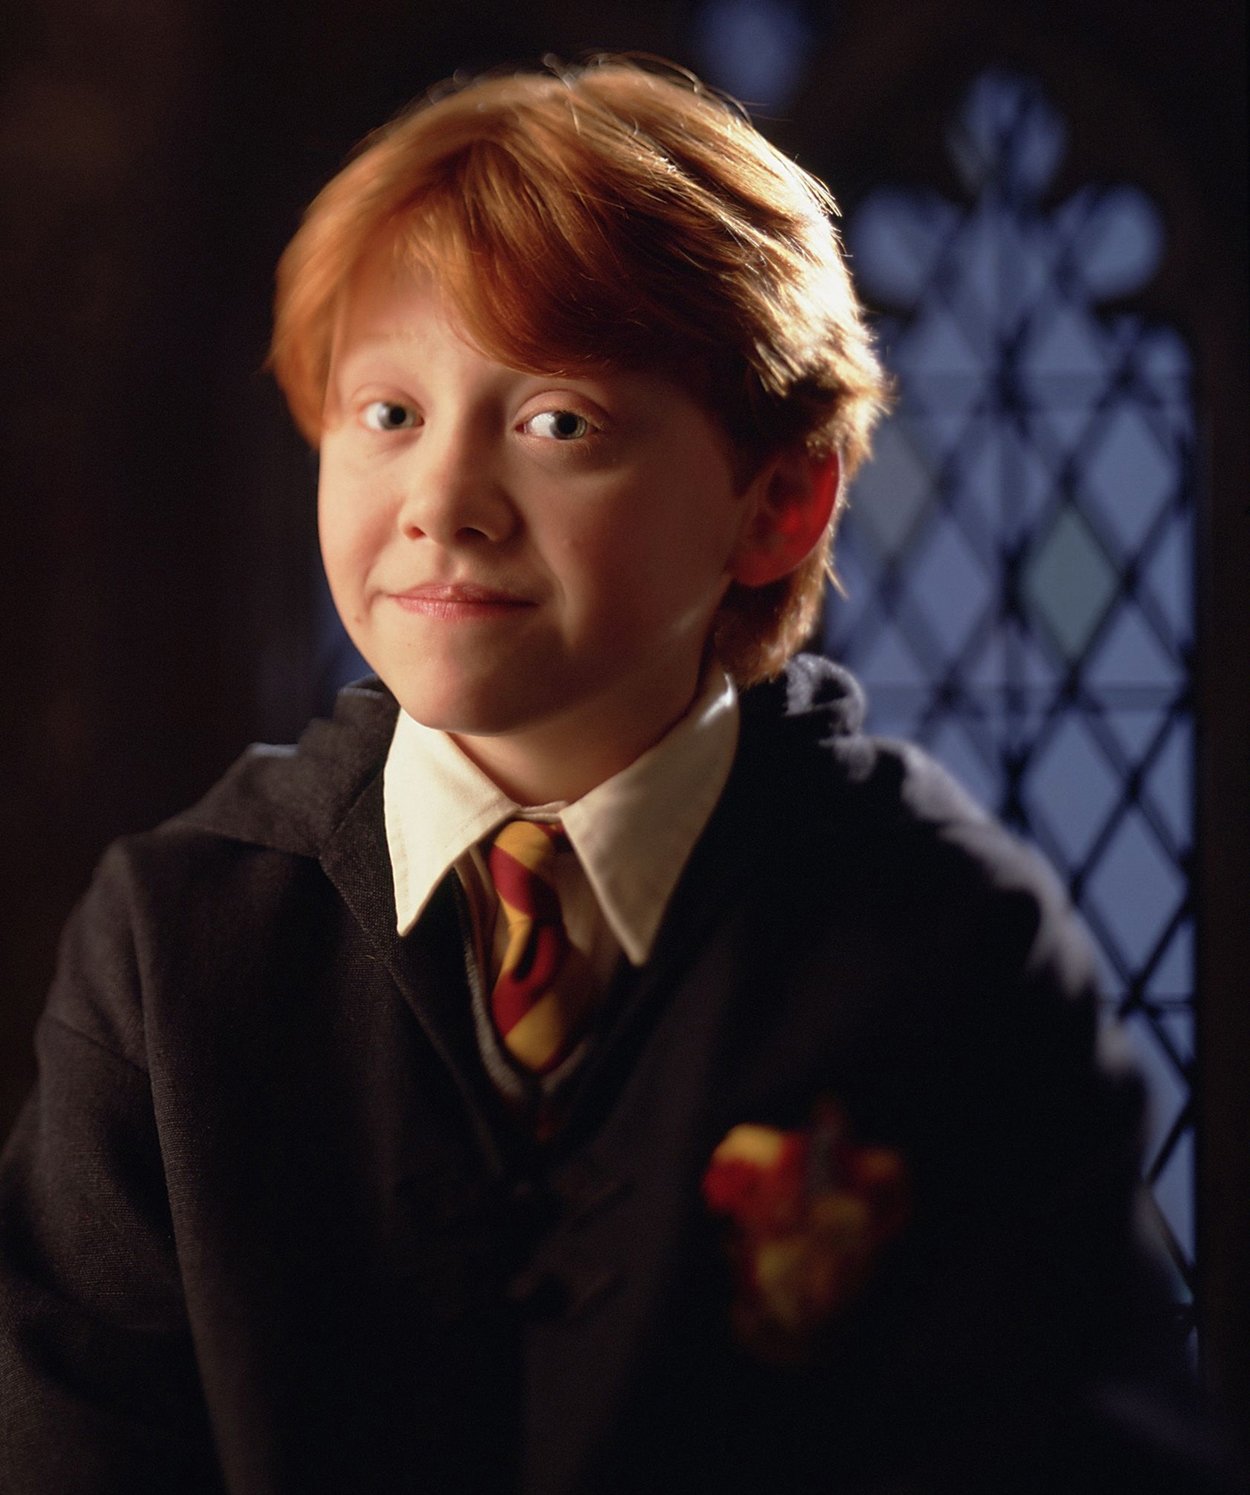 Rupert Alexander Lloyd Grint was 13 years old when Harry Potter and the Philosopher